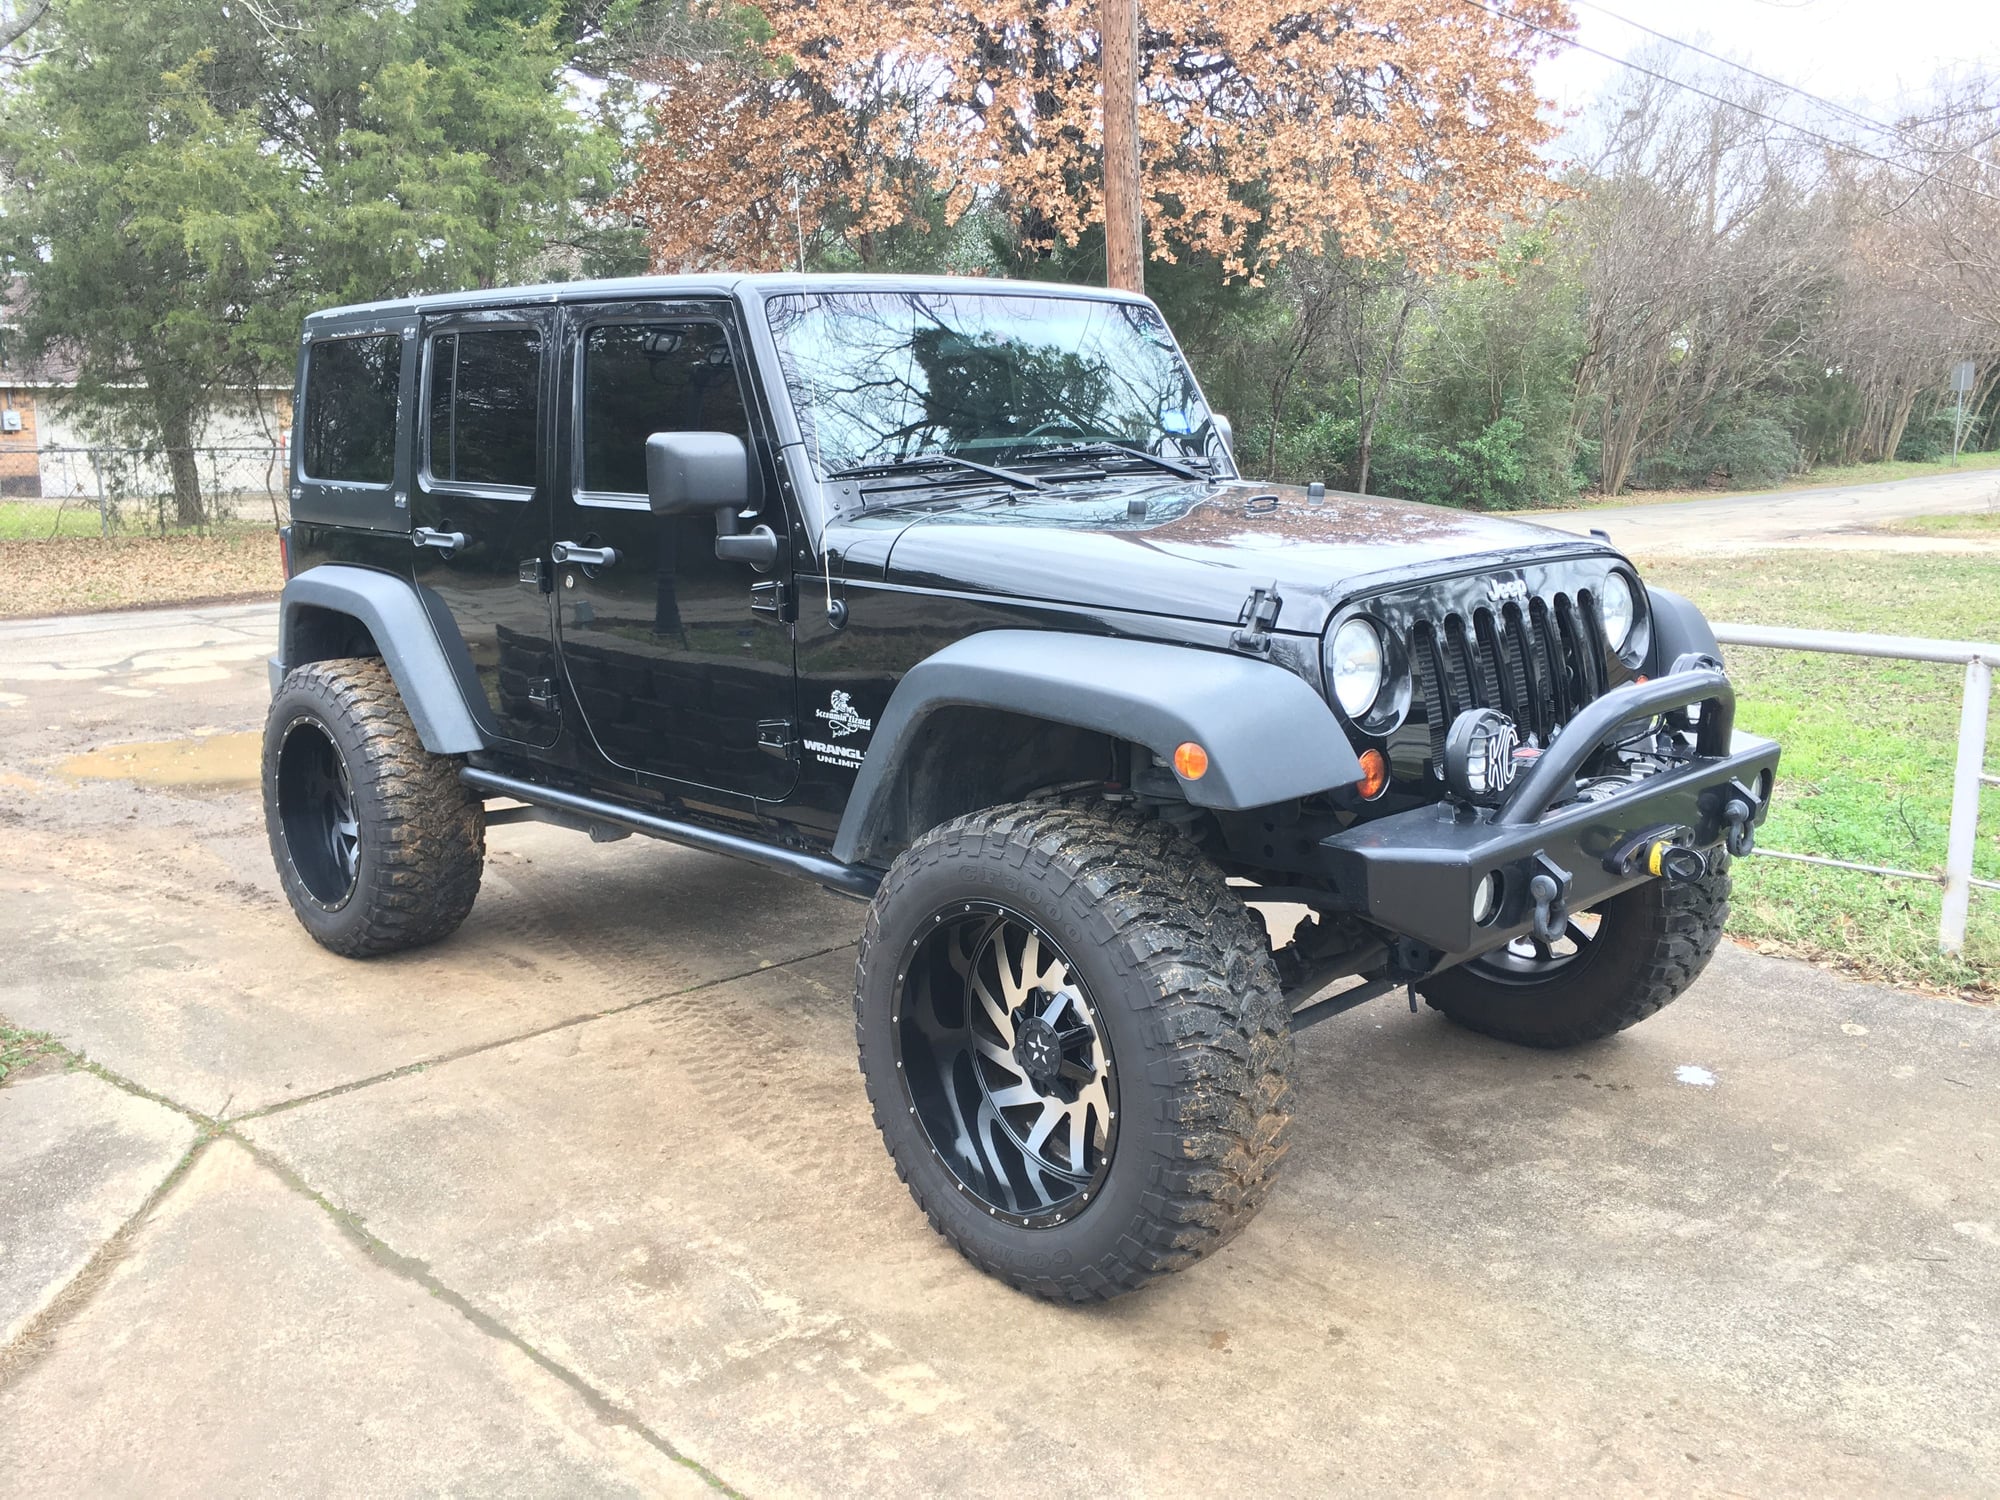 2012 Jeep Wrangler - 2012 Jeep Wrangler unlimited, modified, lifted - Used - VIN Have to check - 138,000 Miles - 6 cyl - Automatic - SUV - Black - Denver, CO 80202, United States